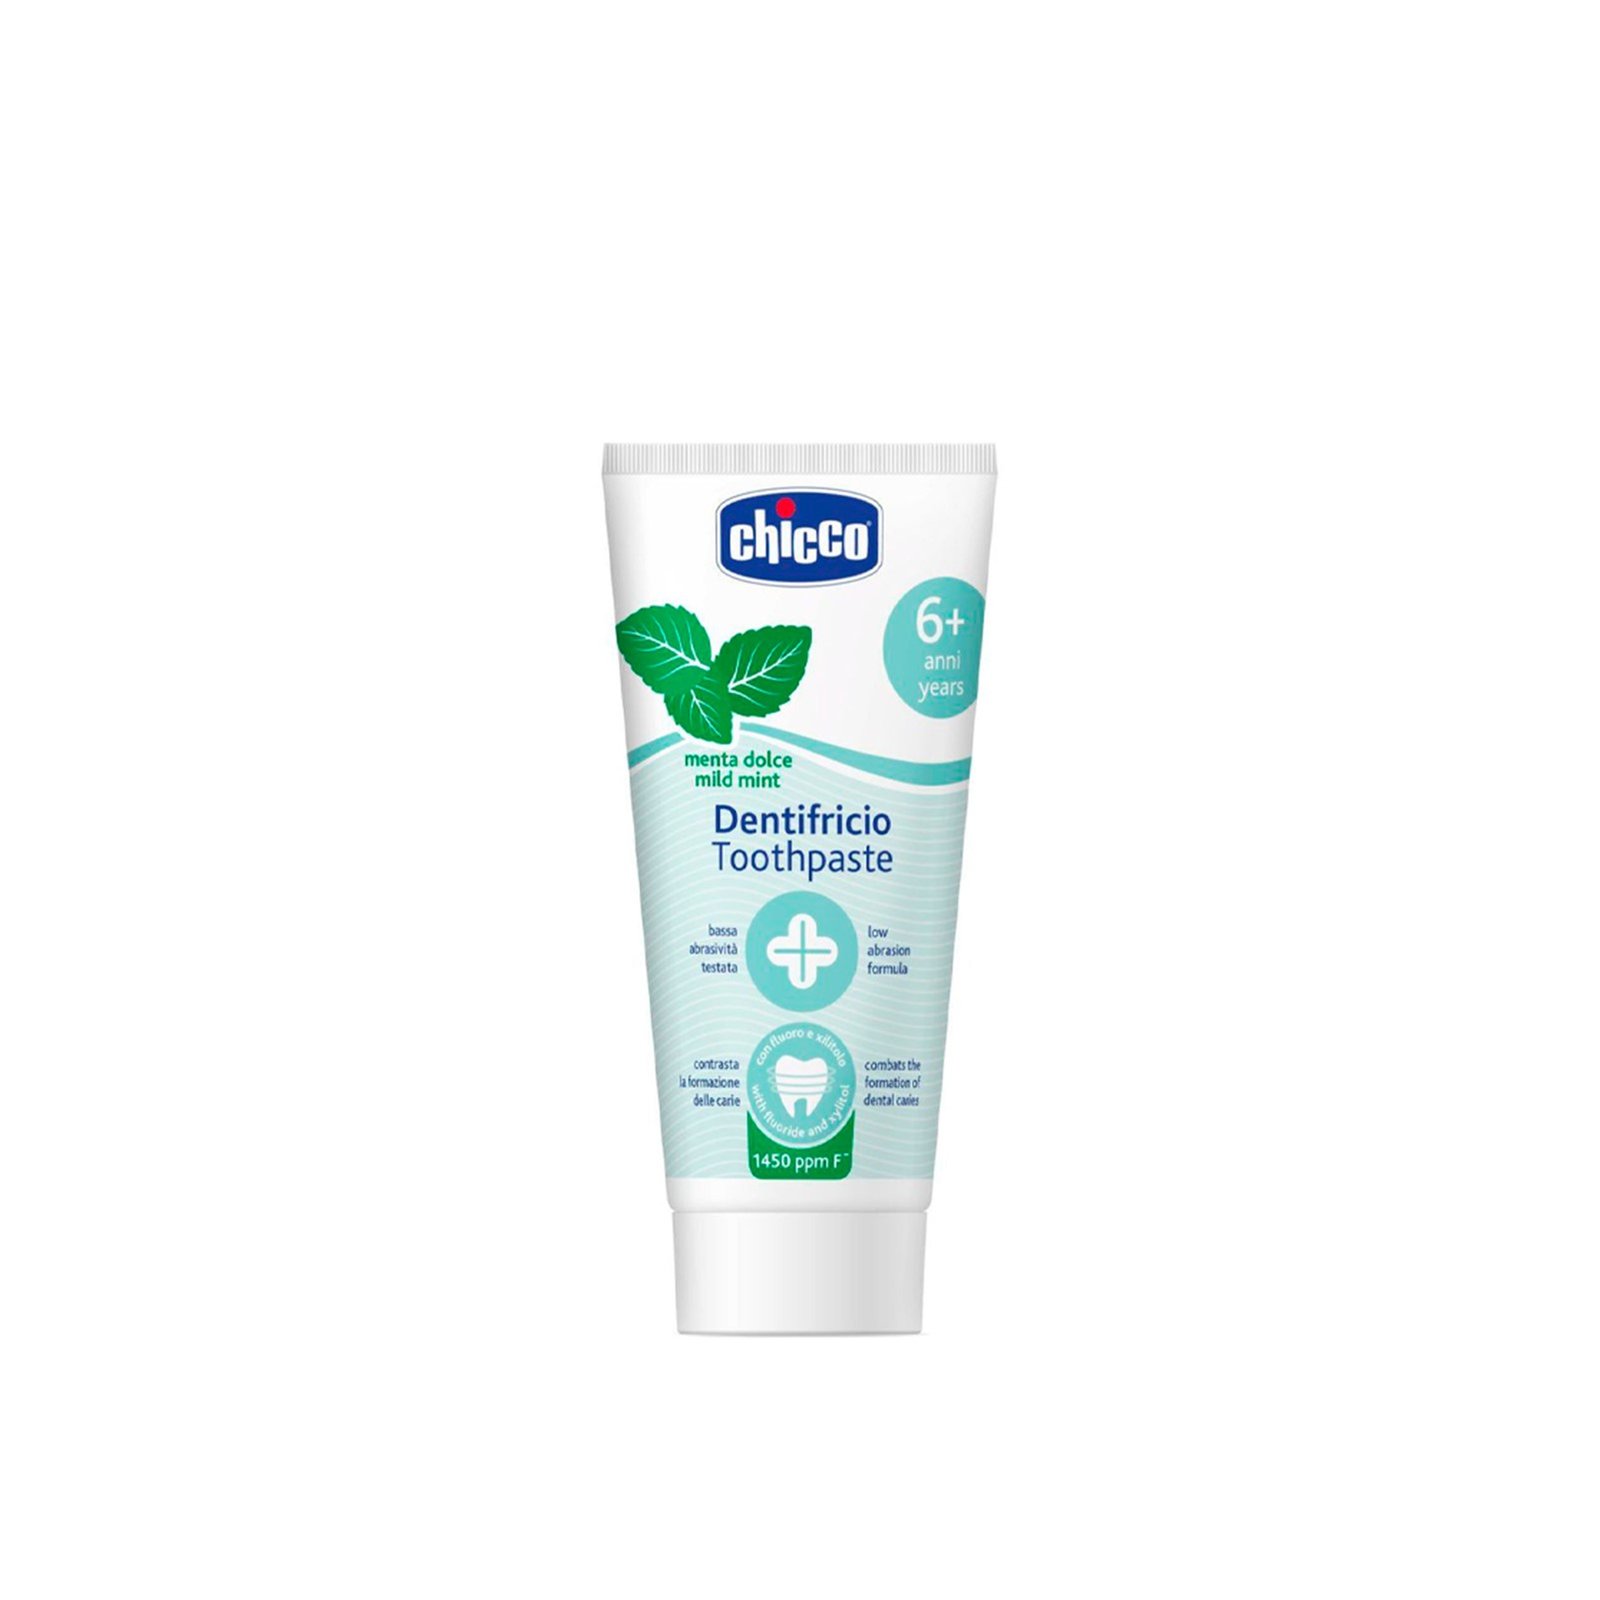 Chicco Mild Mint Toothpaste 6+ Years 50ml (1.69 fl oz)